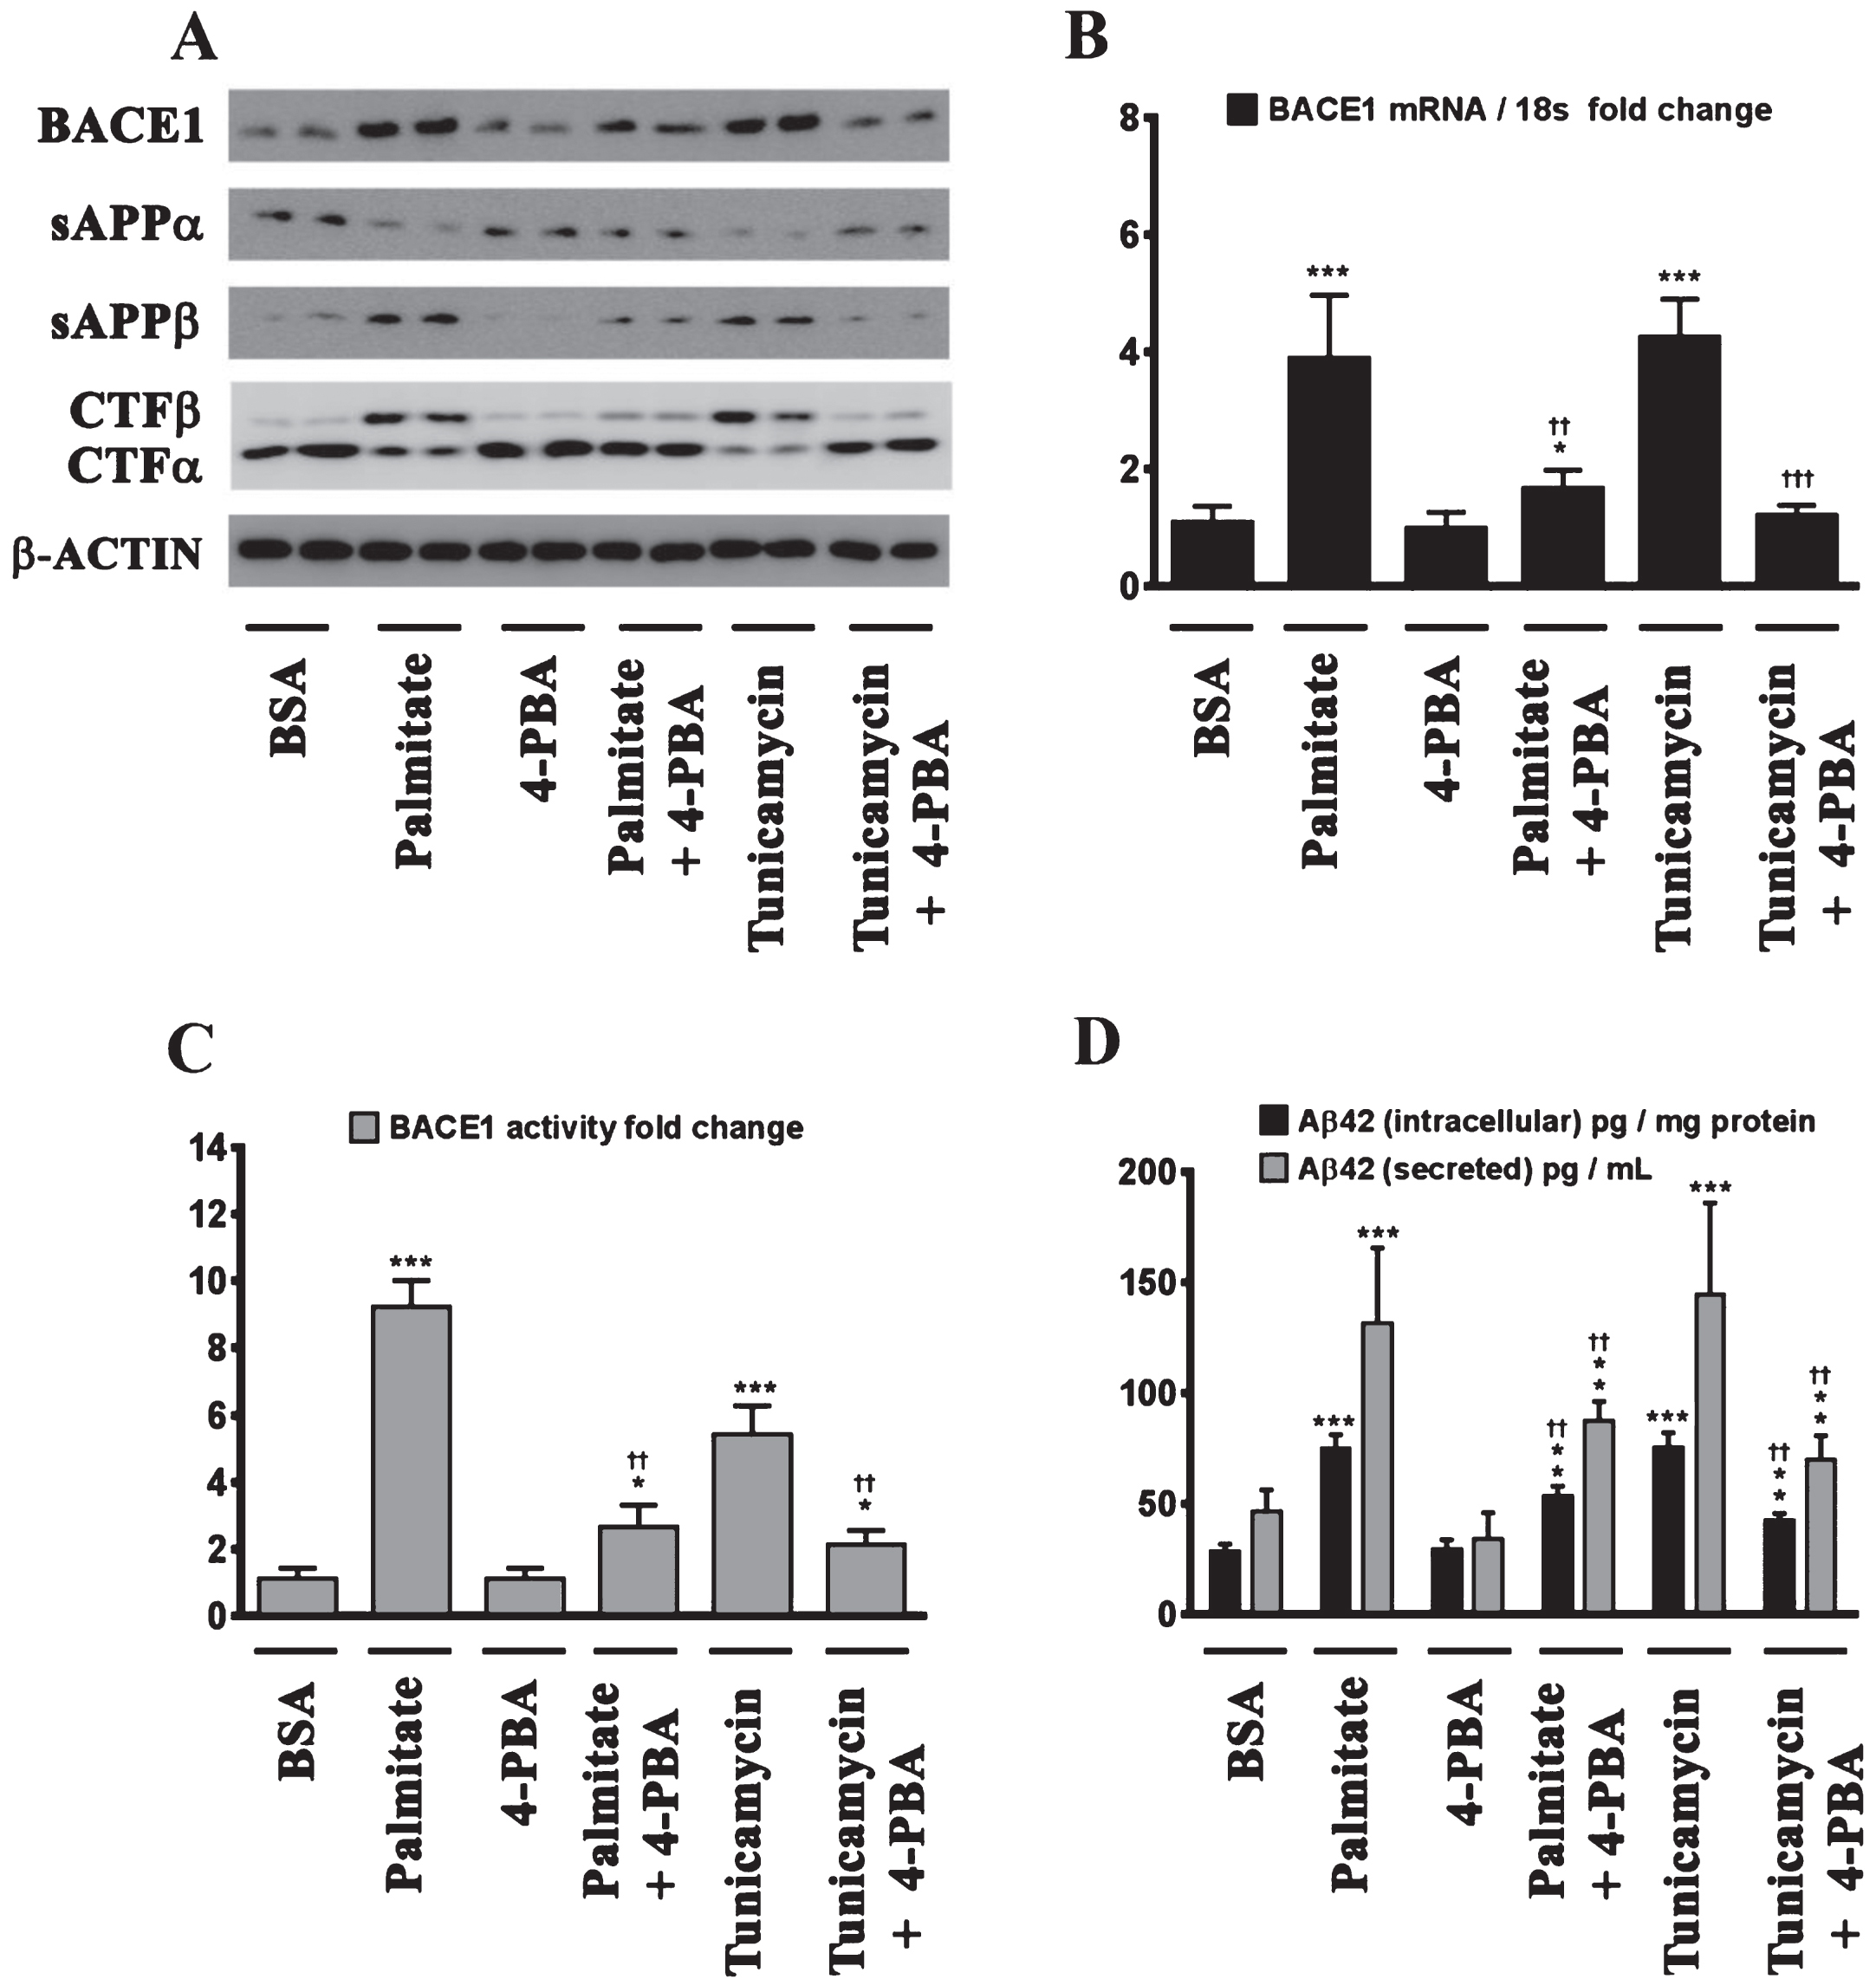 Palmitate induces BACE1 expression and subsequent Aβ genesis by inducing ER stress. A) Representative western blots show that pretreatment (for 2 h) of the human neuroblastoma cells with the molecular chaperone 4-PBA significantly precludes the palmitate-induced increase in BACE1 protein levels accompanied by a decrease in the amyloidogenic processing of AβPP as evidenced by a decrease in the palmitate-induced increase in sAβPPβ and CTFβ levels concomitant with an increase in the palmitate-induced decrease in sAβPPα and CTFα levels in the whole cell homogenates from SH-SY5Y-APPSwe cells. B, C) Pretreatment with 4-PBA attenuates the palmitate-induced increase in BACE1 mRNA expression (B) and BACE1 activity (C) in SH-SY5Y-APPSwe cells. D) ELISA immunoassays show that pretreatment with 4-PBA significantly attenuates the exogenous palmitate treatment-induced increase in the levels of the intracellular Aβ1 - 42 species in the whole cell lysates and secreted Aβ1 - 42 species in the conditioned media, from SH-SY5Y-APPSwe cells. Pretreatment (for 2 h) with the molecular chaperone 4-PBA also significantly precludes the Tunicamycin-induced increase in the following - BACE1 protein levels (A), BACE1 mRNA expression (B) and BACE1 activity (C), and intracellular as well as secreted Aβ1 - 42 species (D), in SH-SY5Y-APPSwe cells. Data is expressed as Mean±S.D and includes determination made in four (n = 4) separate cell culture experiments. *p < 0.05, **p < 0.01, ***p < 0.001 versus BSA-treated cells; ††p < 0.01, †††p < 0.001, versus palmitate-treated cells or Tunicamycin-treated cells.